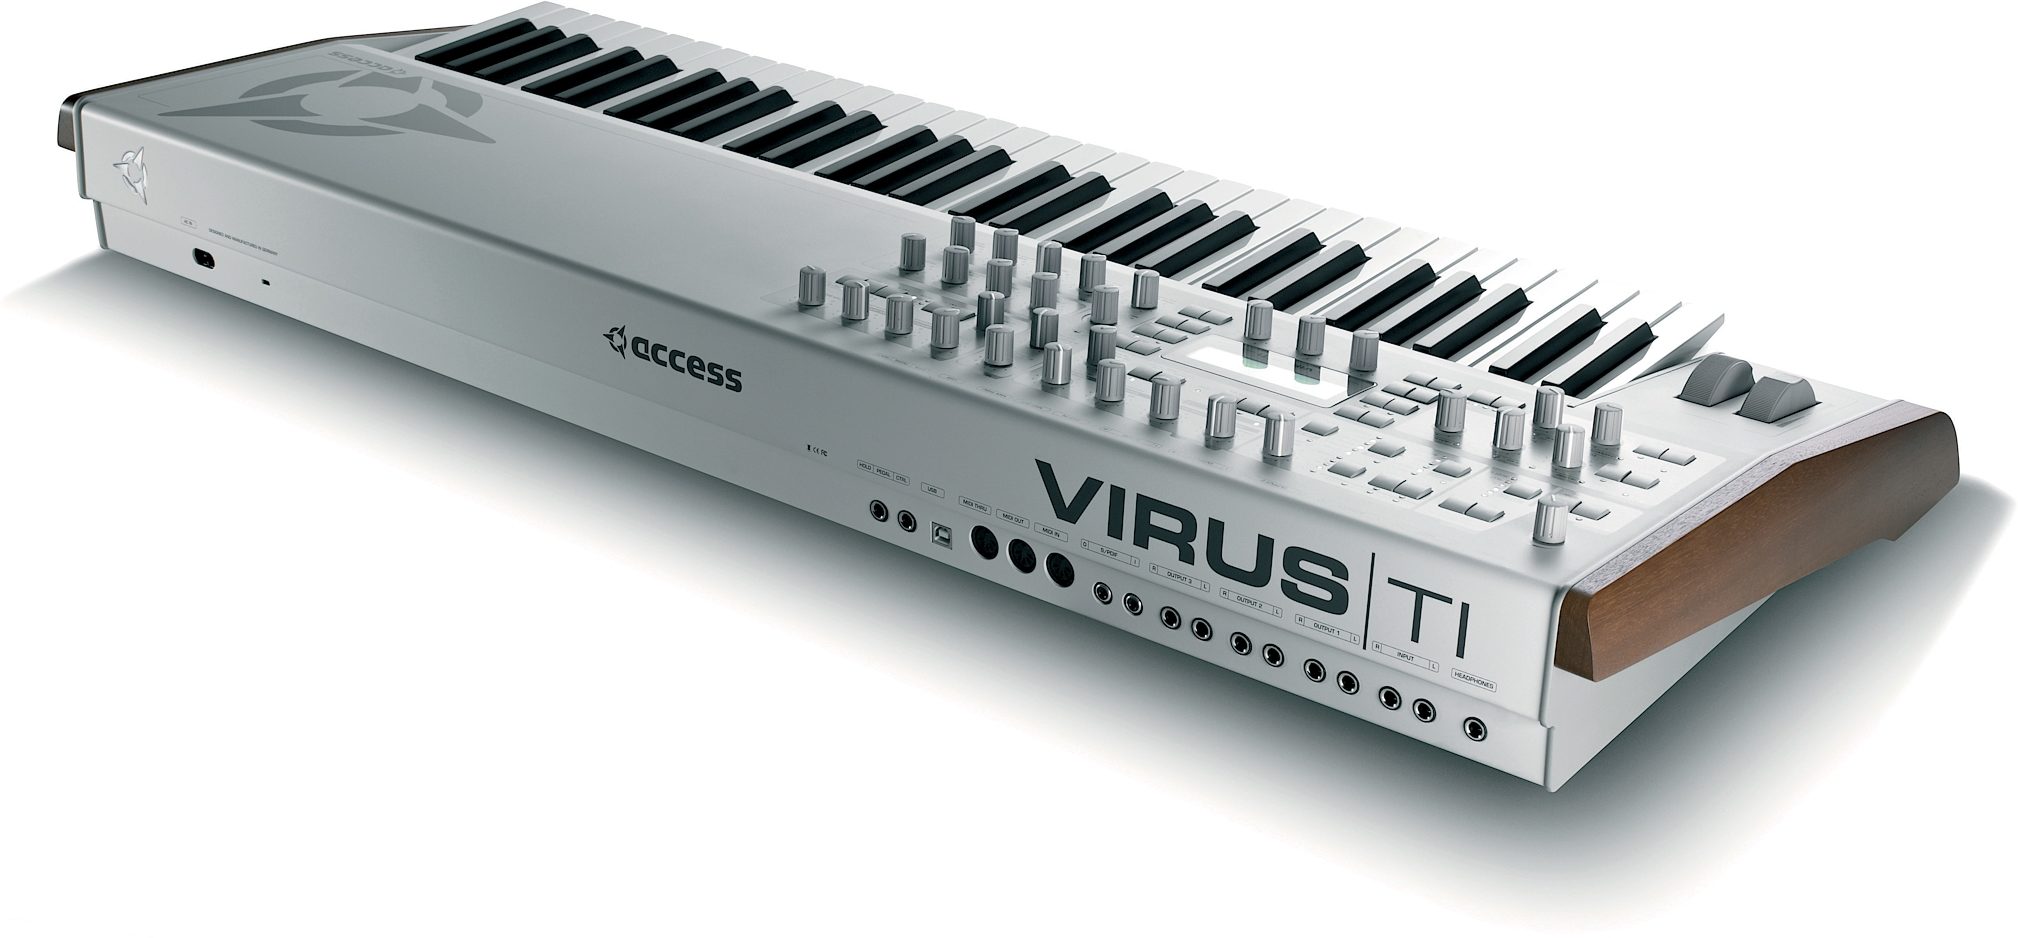 Access Virus TI2 WhiteOut Limited Edition Integrated Modeling